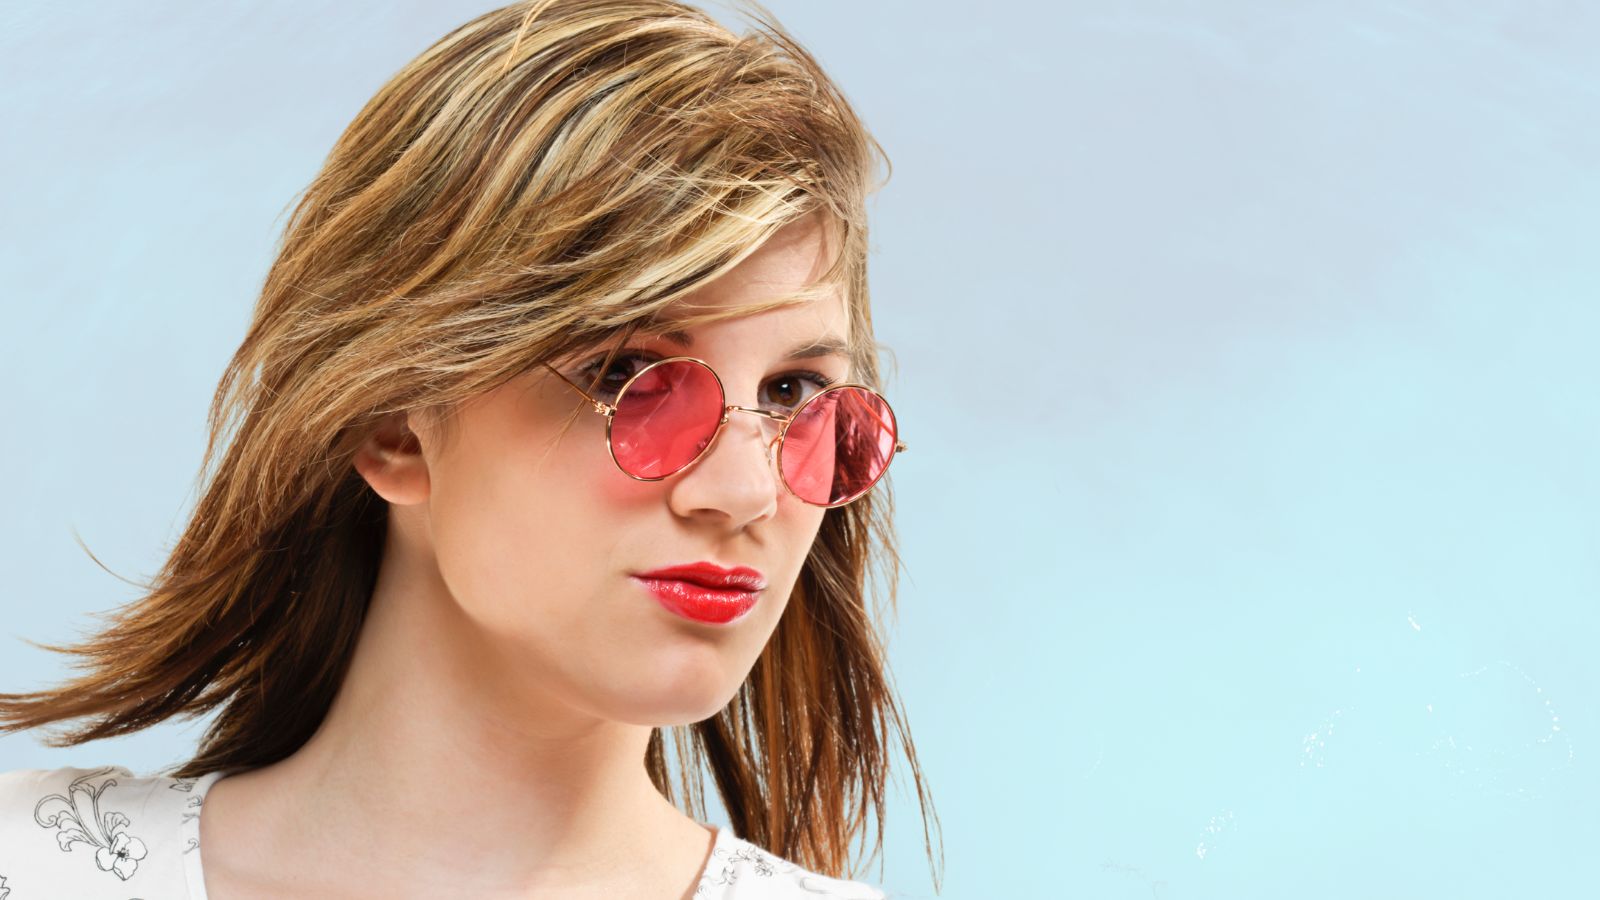 how to improve your self esteem see yourself with kind eyes. Image of woman wearing rose tinted glasses on a blue background